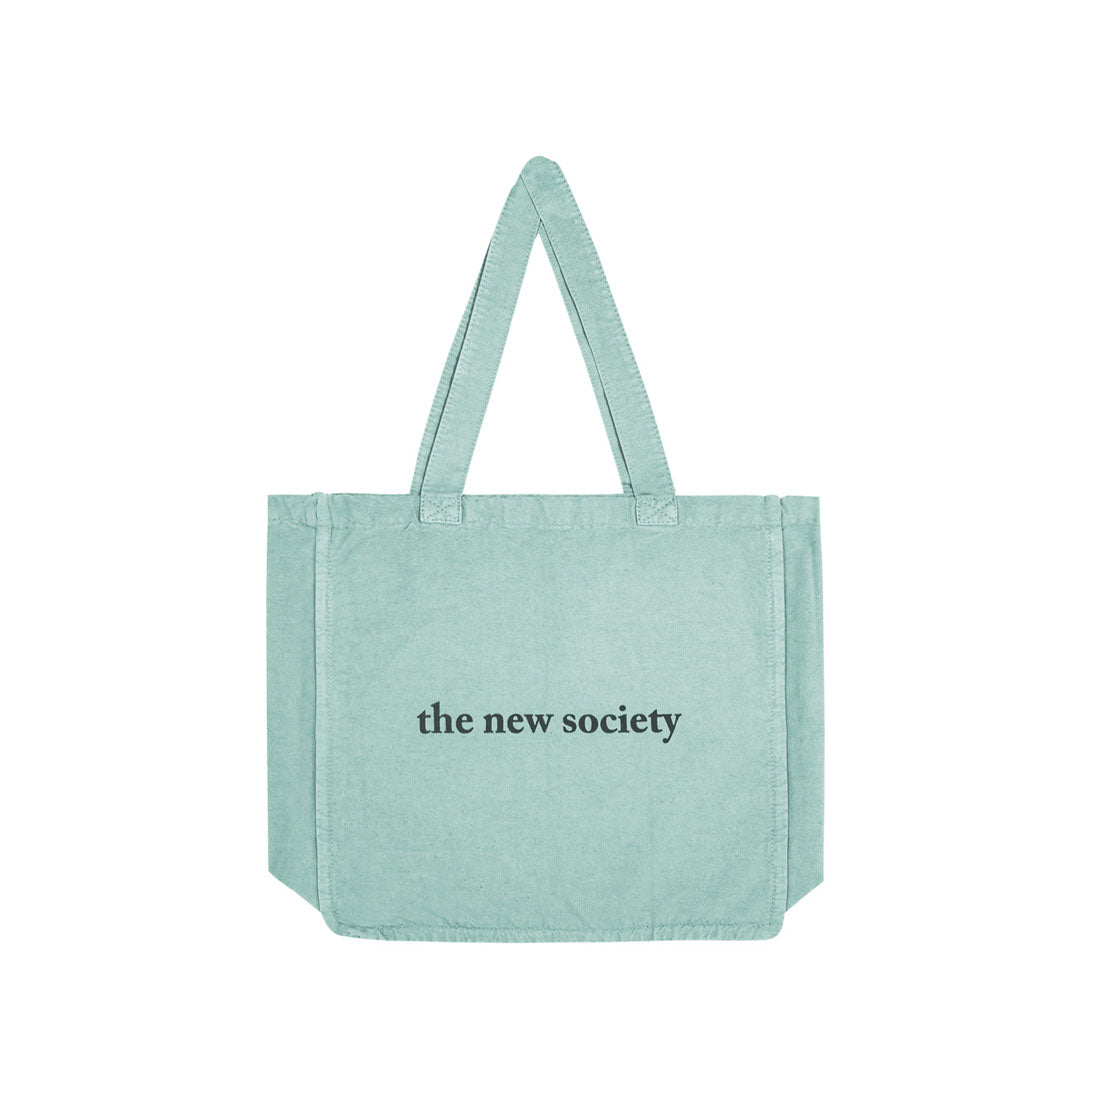 THE NEW SOCIETY BAG / バッグ